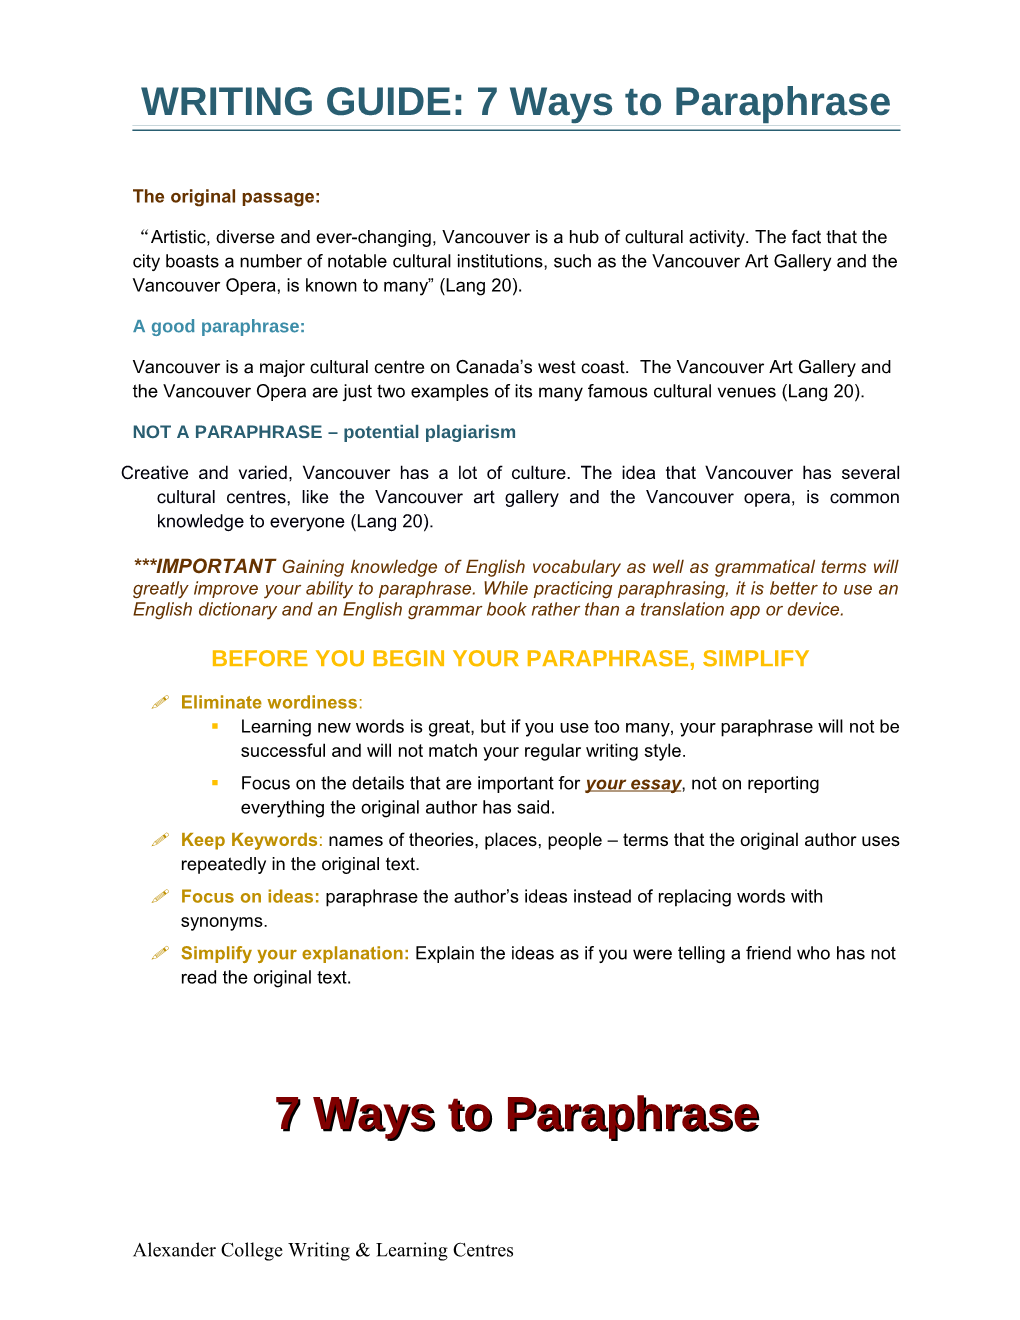 WRITING GUIDE: 7 Ways To Paraphrase